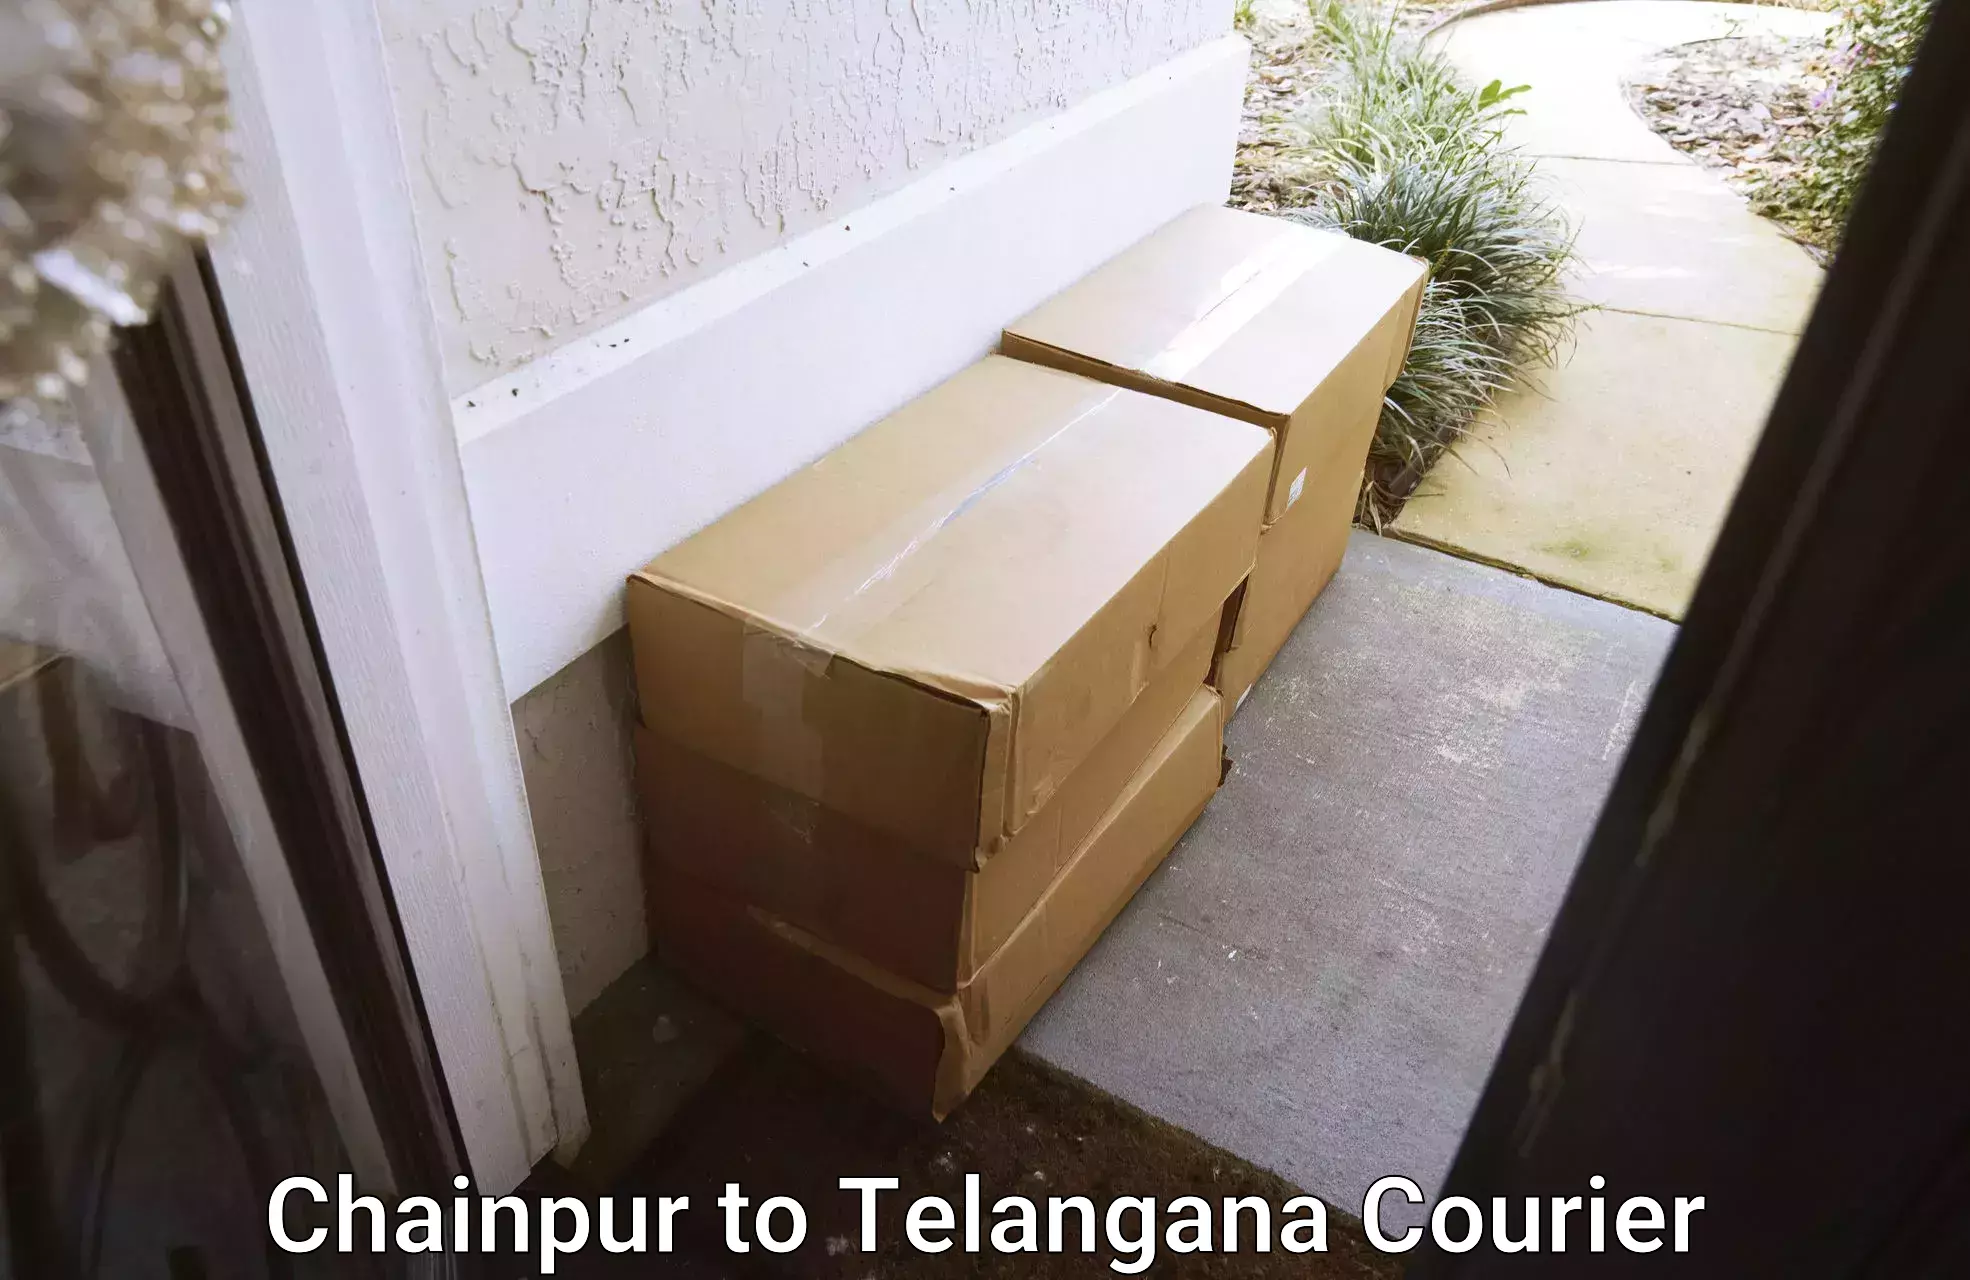 Home goods moving company Chainpur to Warangal